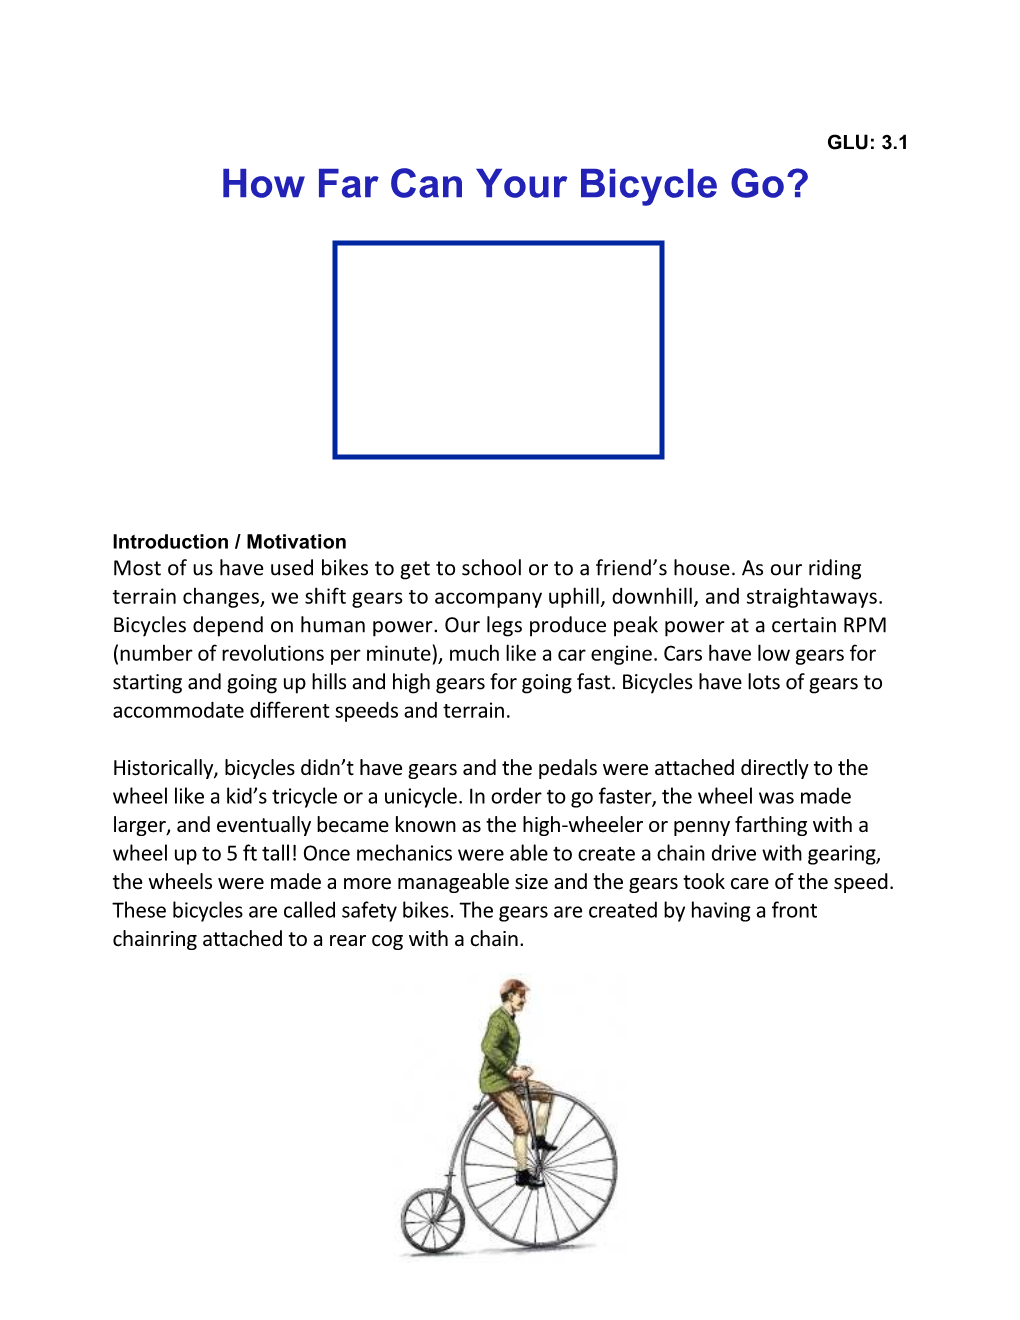 How Far Can Your Bicycle Go?